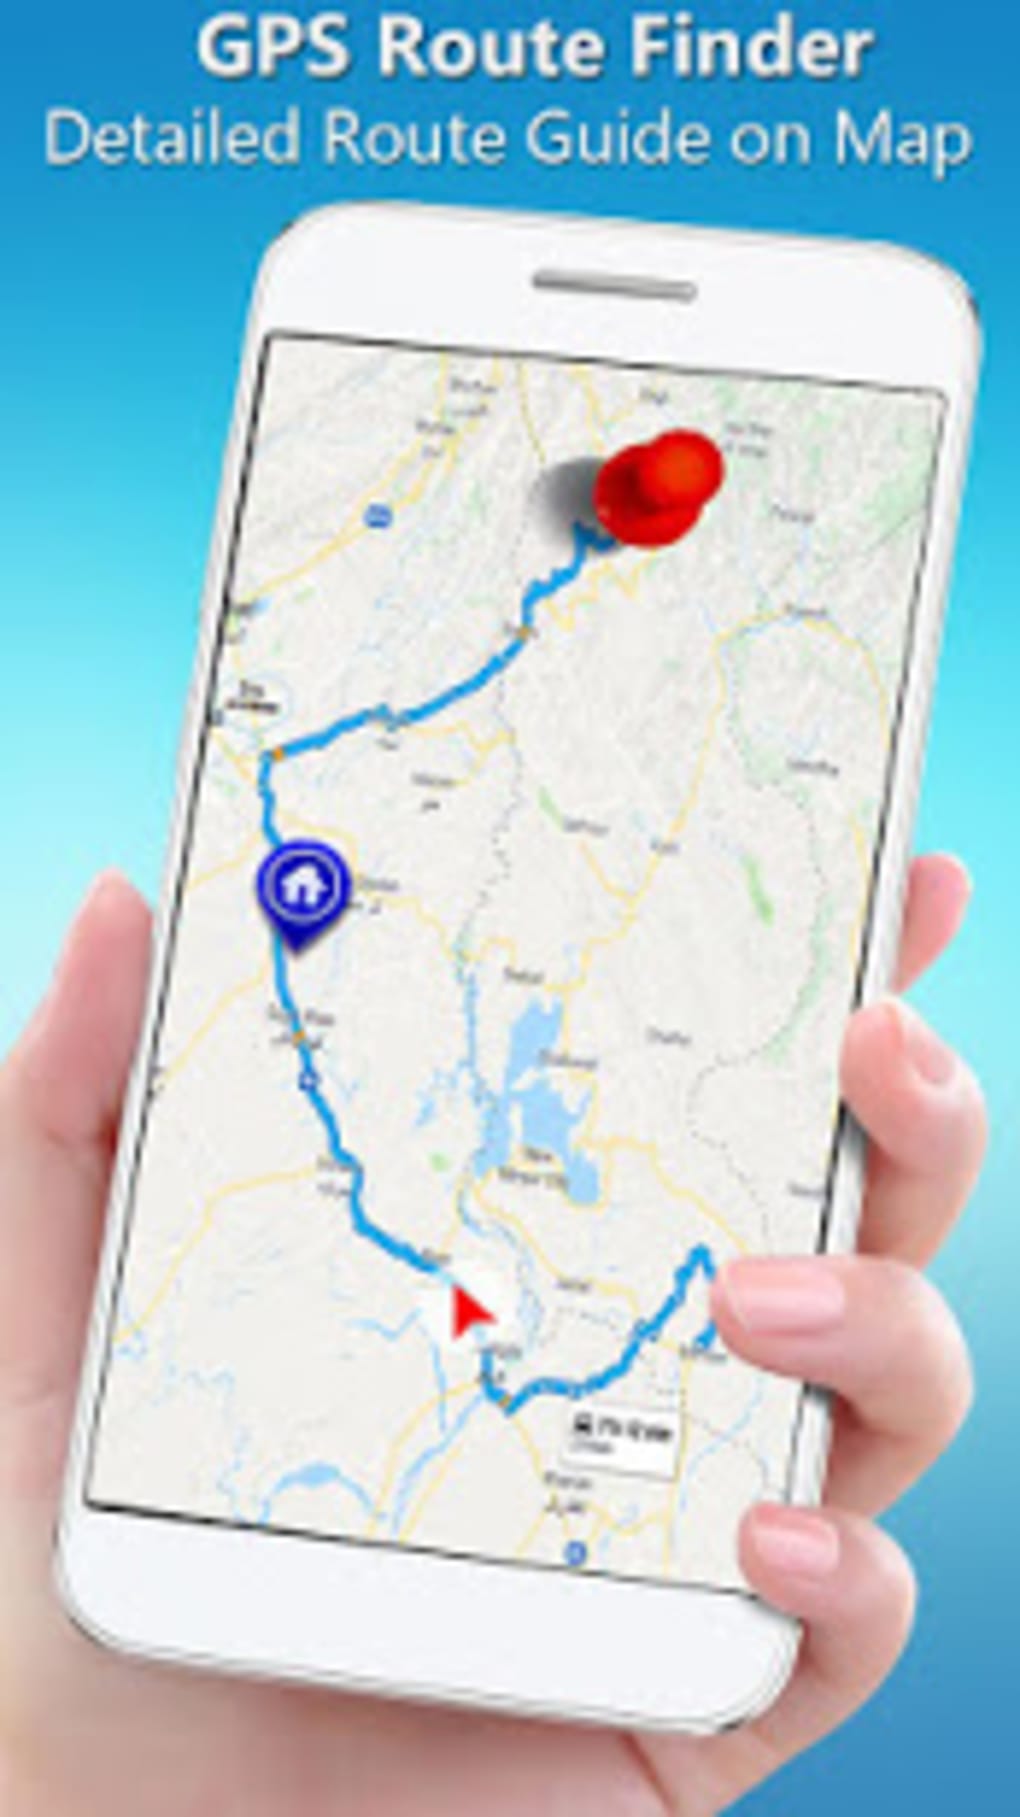 gps map for android free download Gps Satellite Live Maps Navigation Direction Apk For Android gps map for android free download